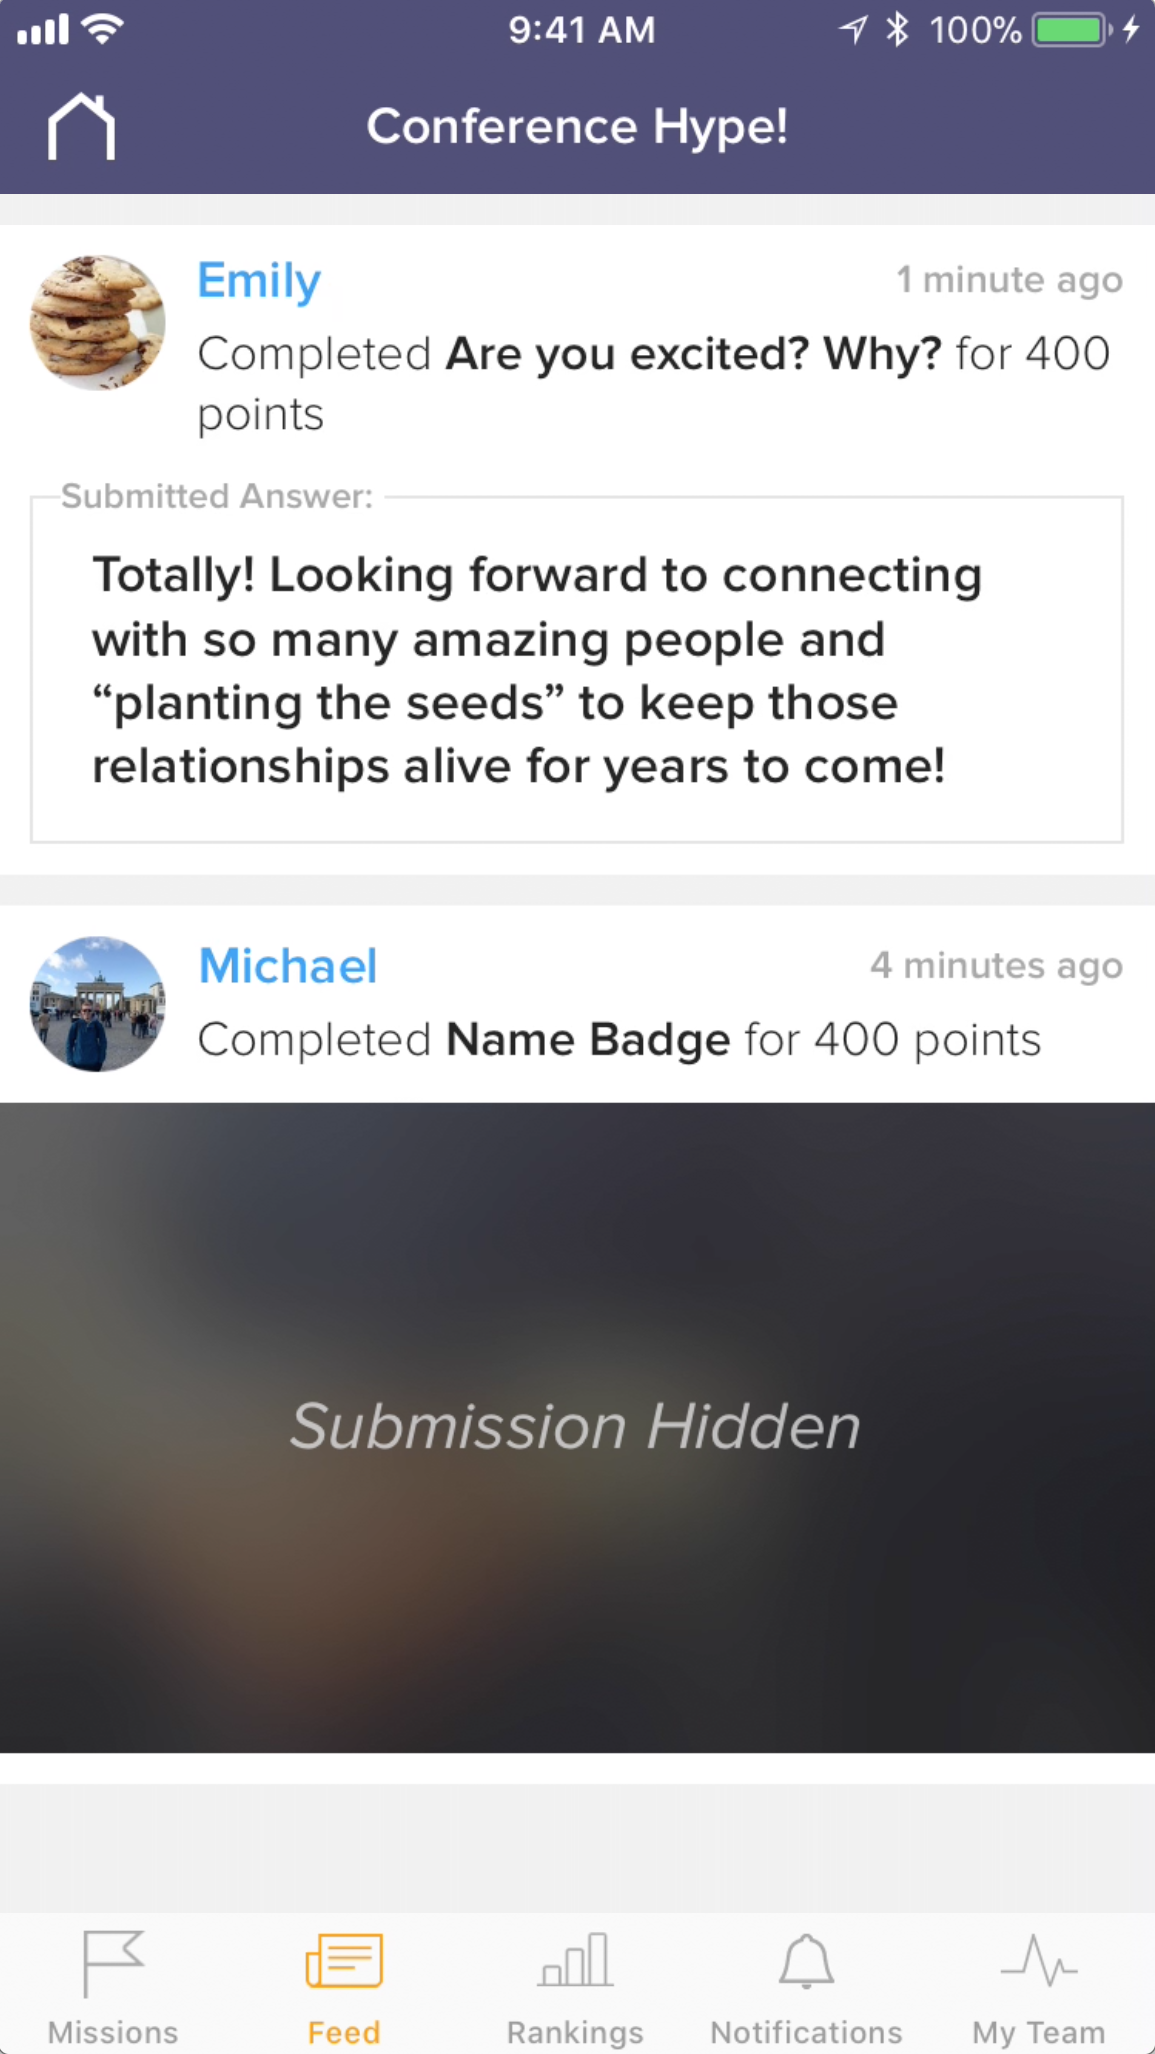 Examples of both public and hidden submissions, with the hidden submission blurred on the Activity Feed